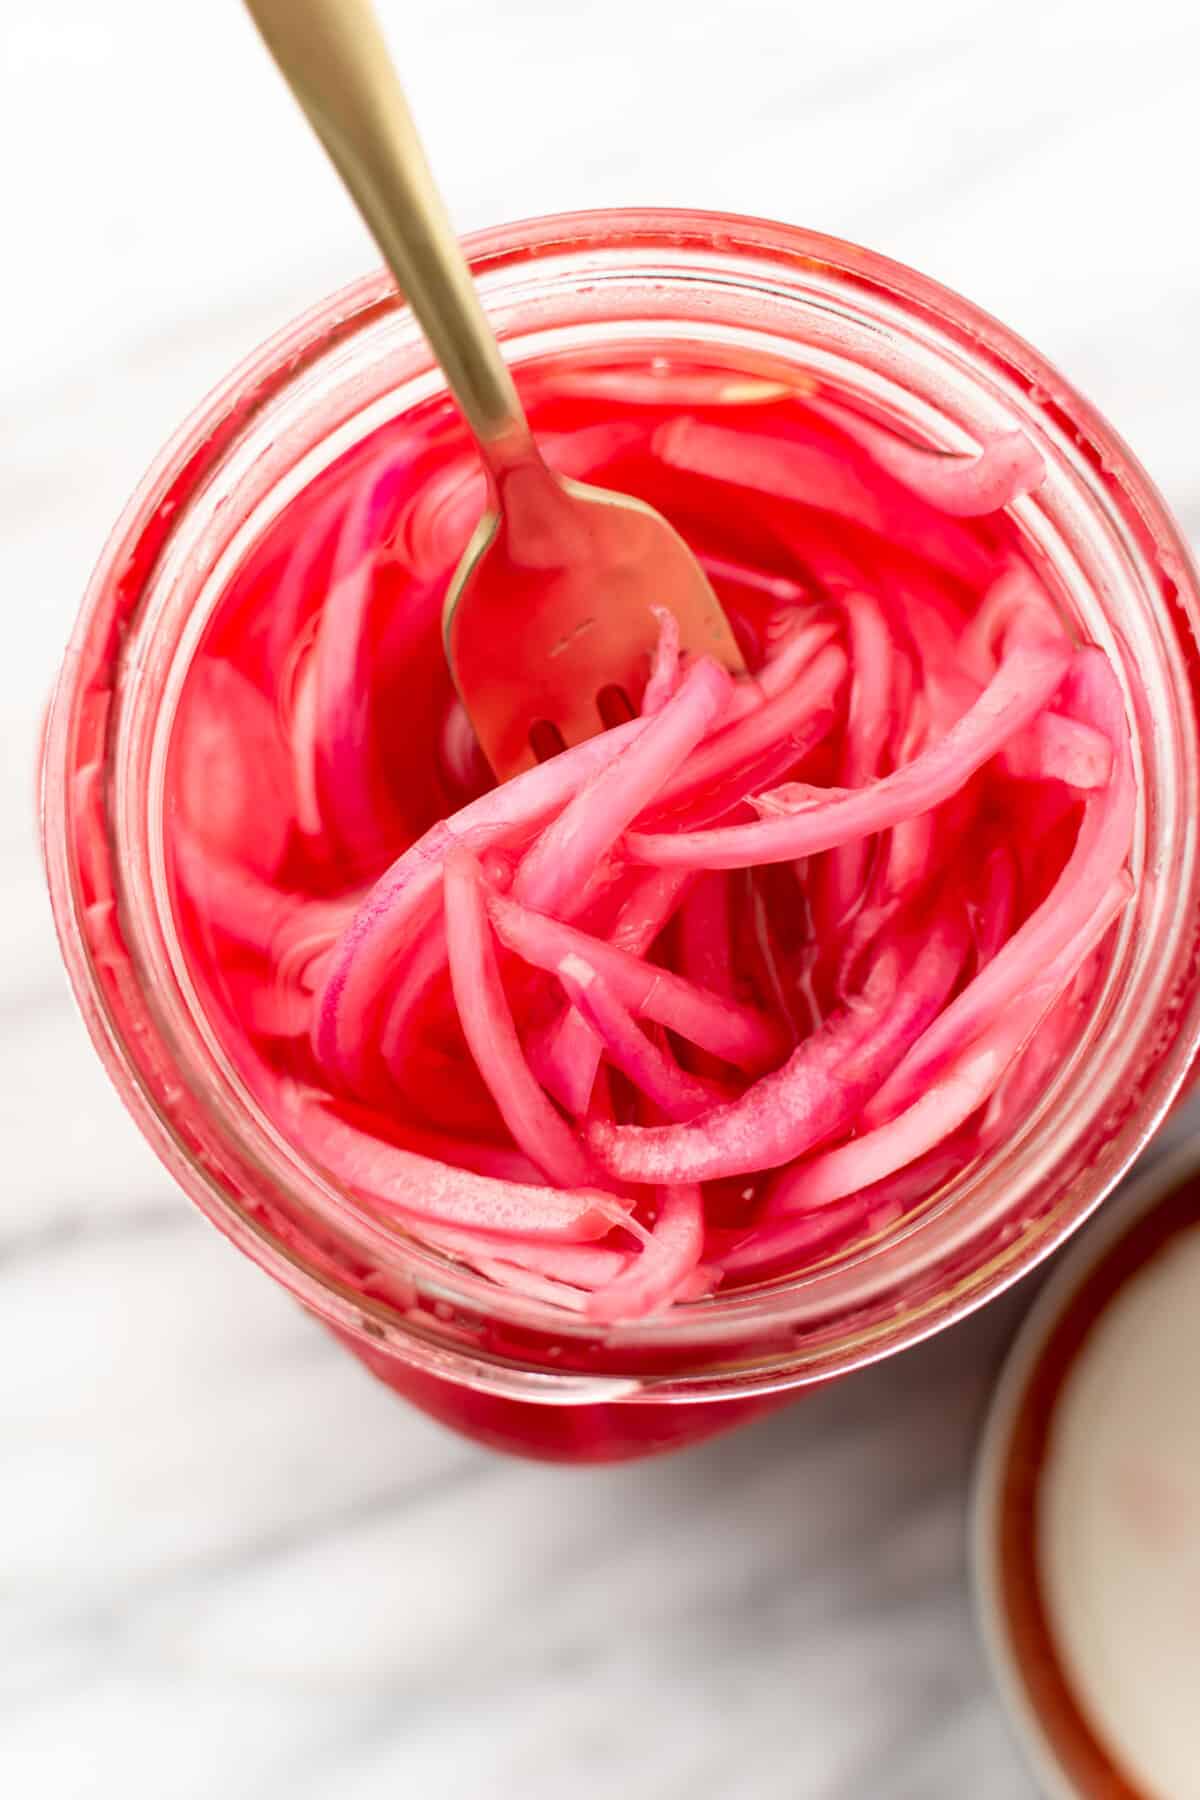 Quick Pickled Red Onions • Salt & Lavender